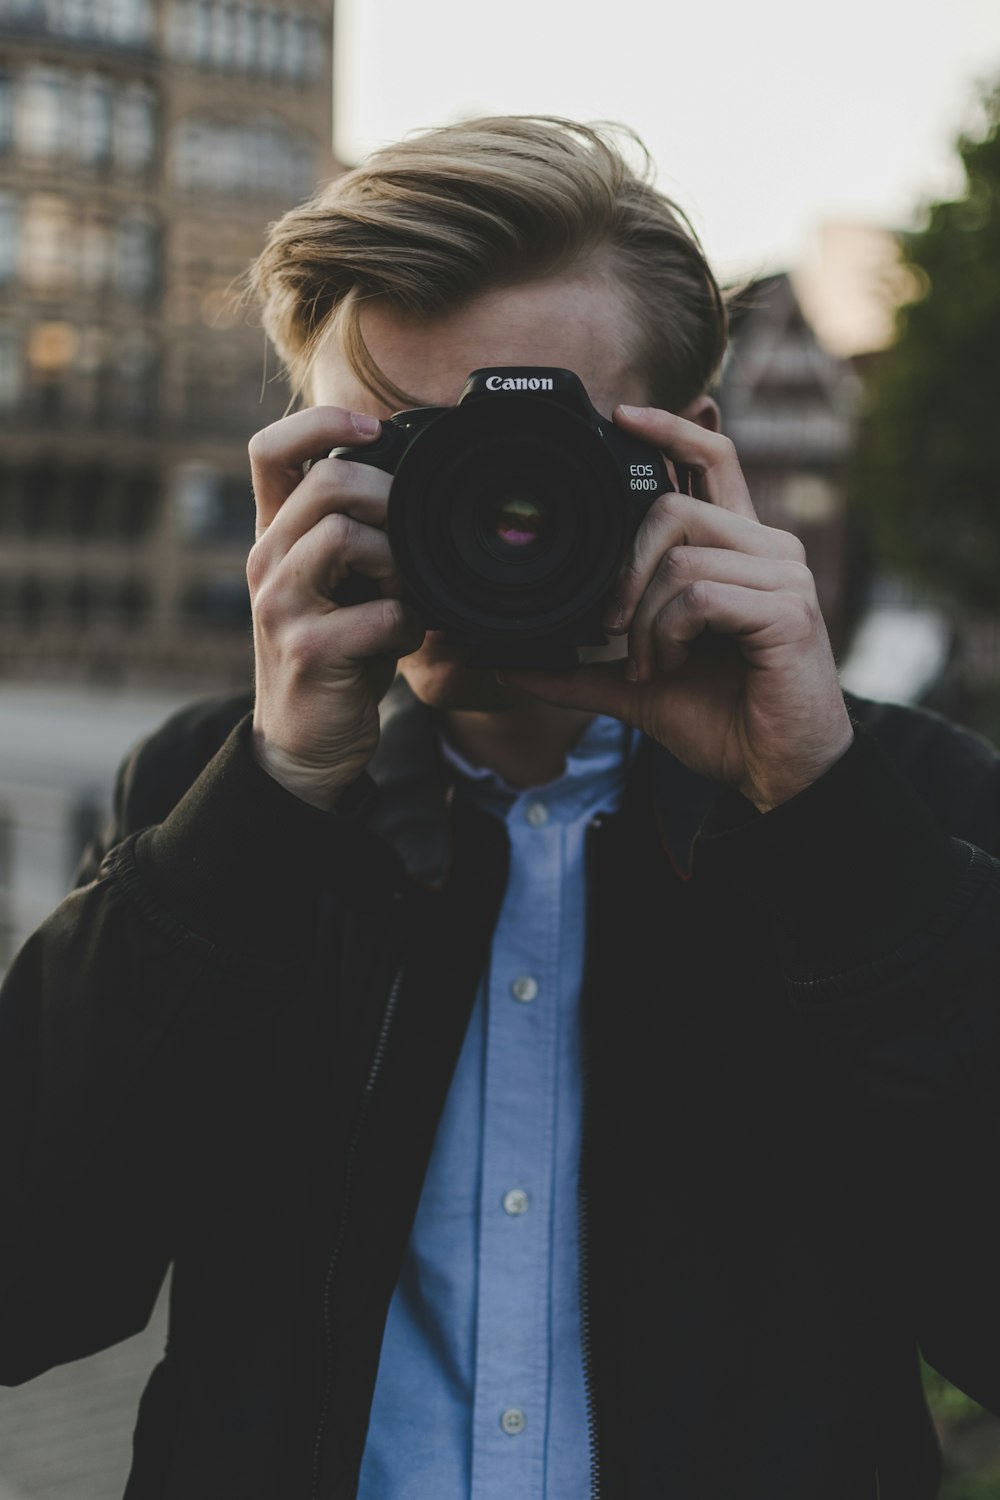 man using black Canon EOS camera during day time